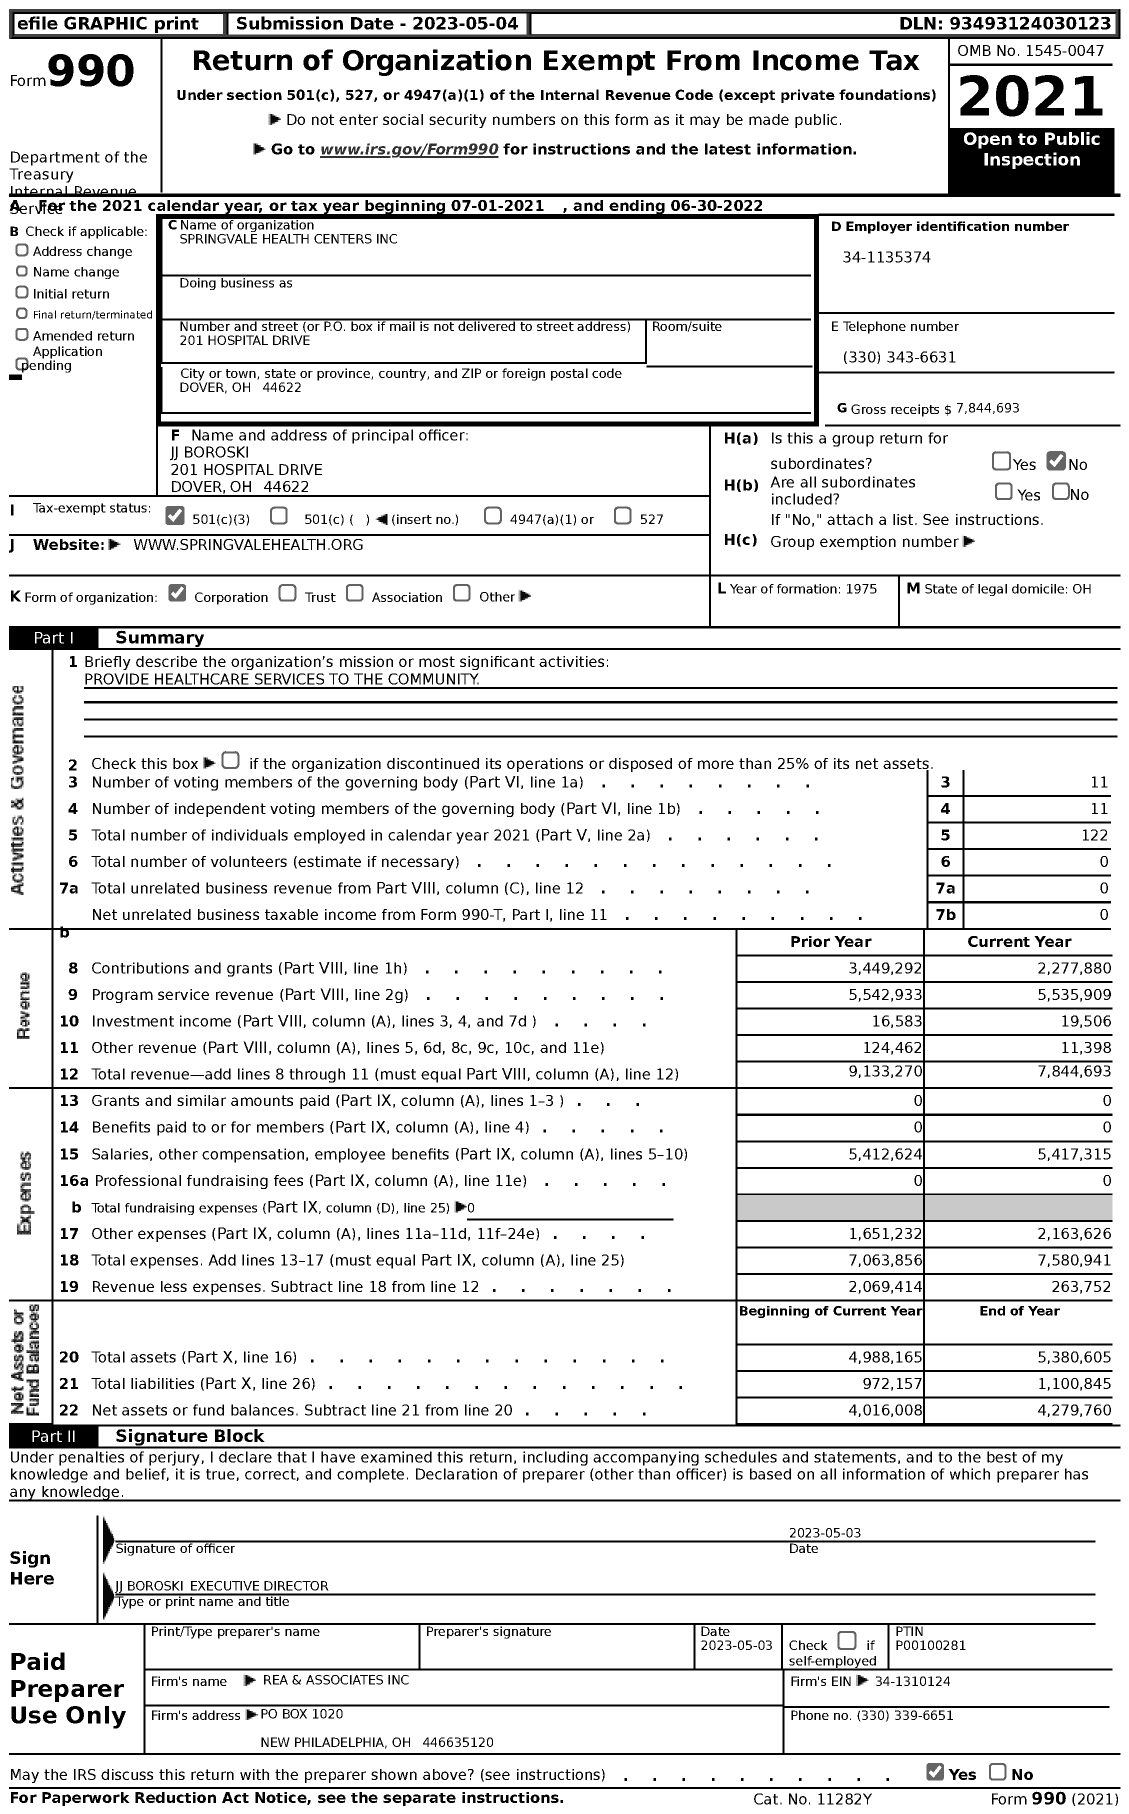 Image of first page of 2021 Form 990 for Springvale Health Centers